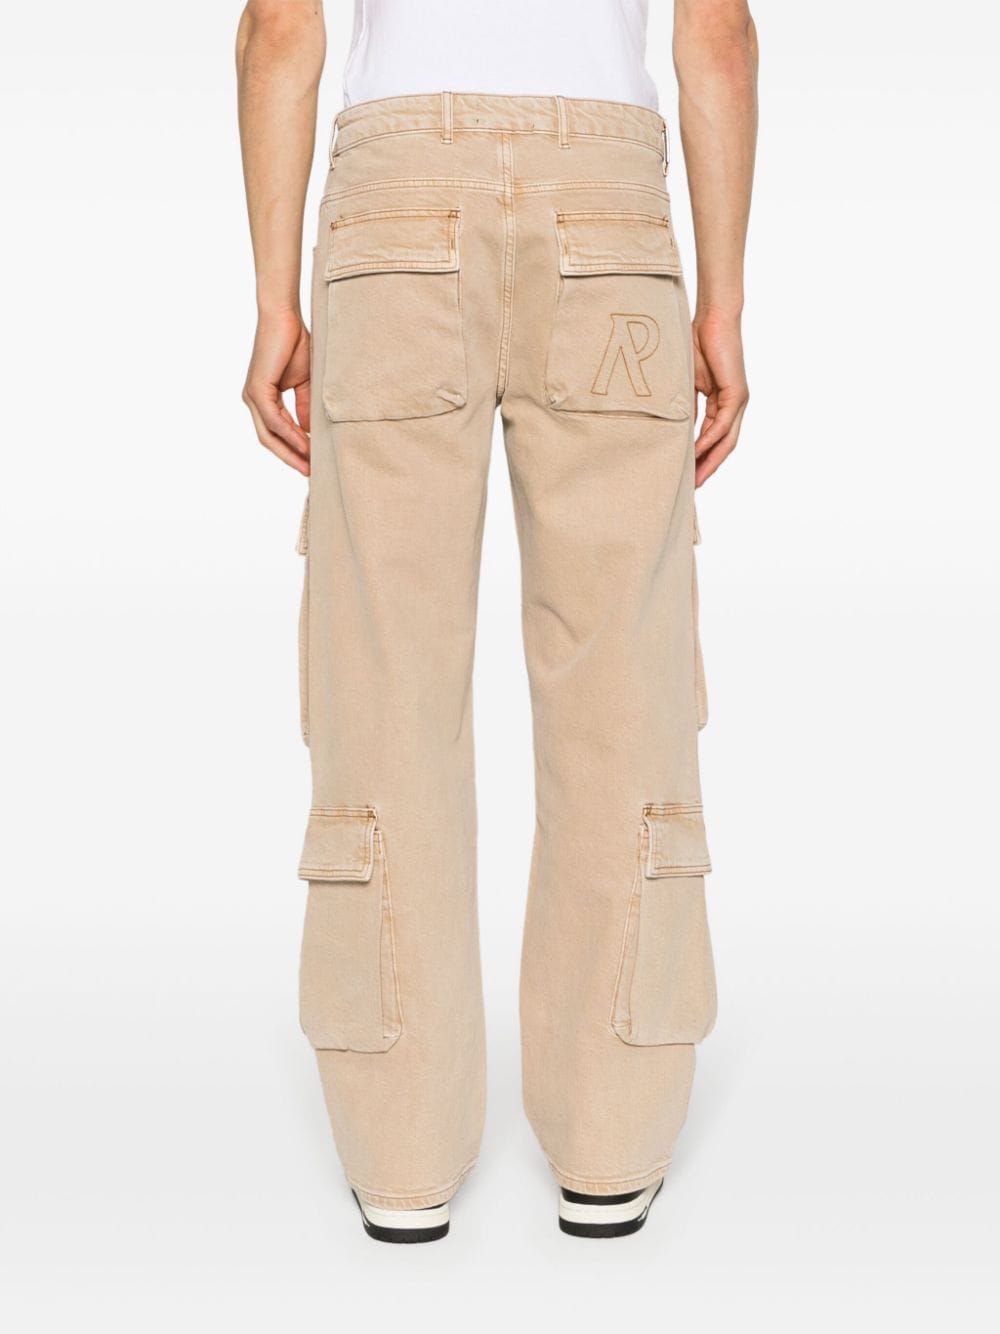 Sand cargo trousers